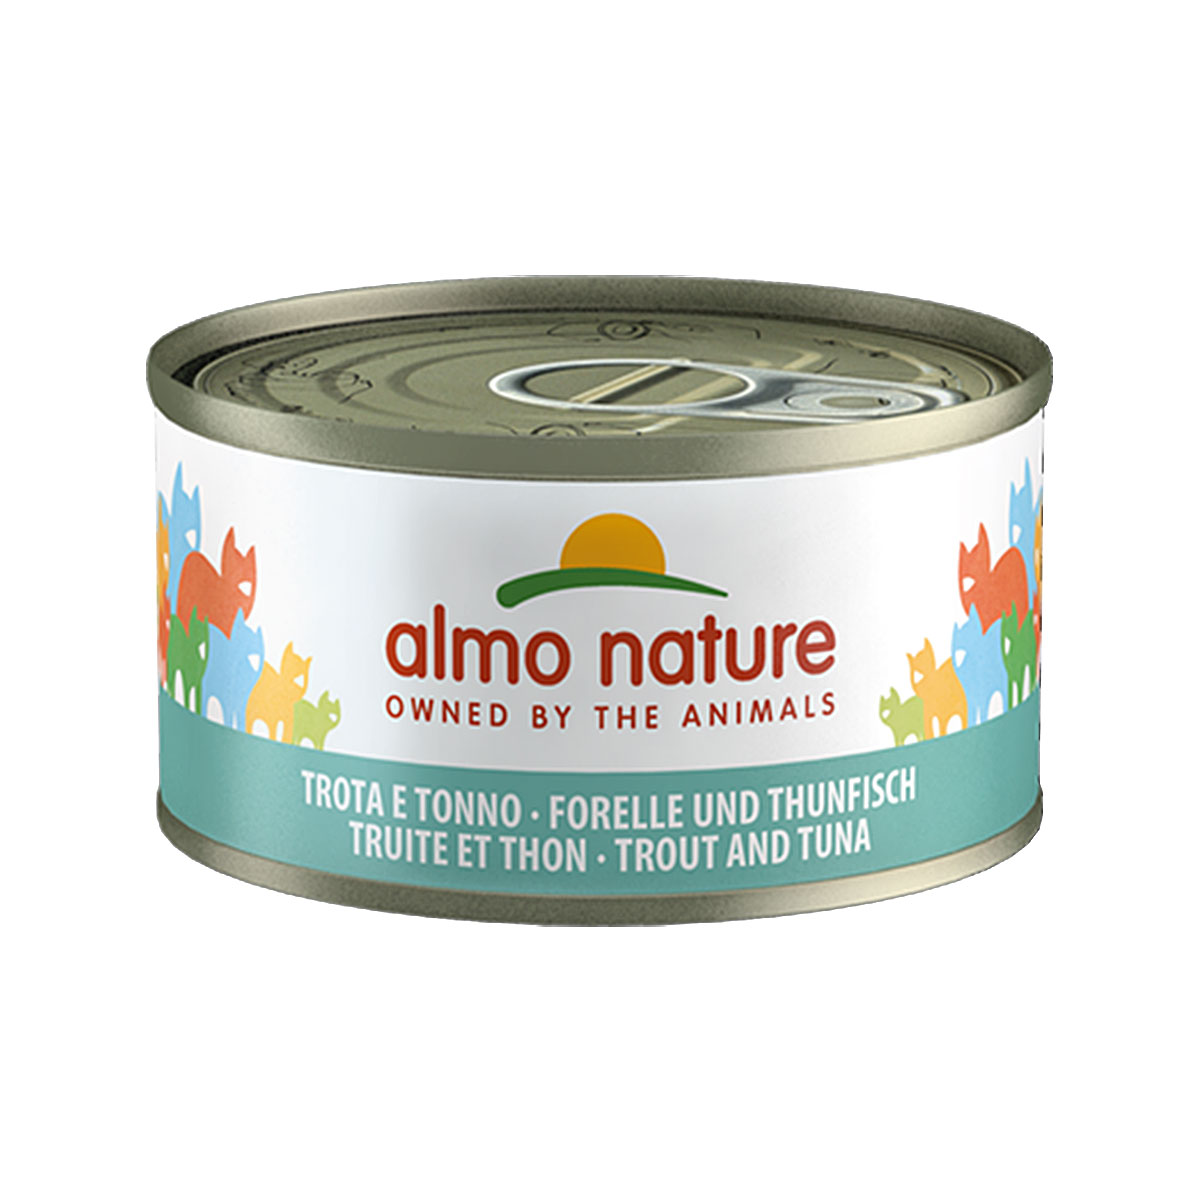 60537 almo nature forelle umd thunfisch 70g 005bc863314bed8